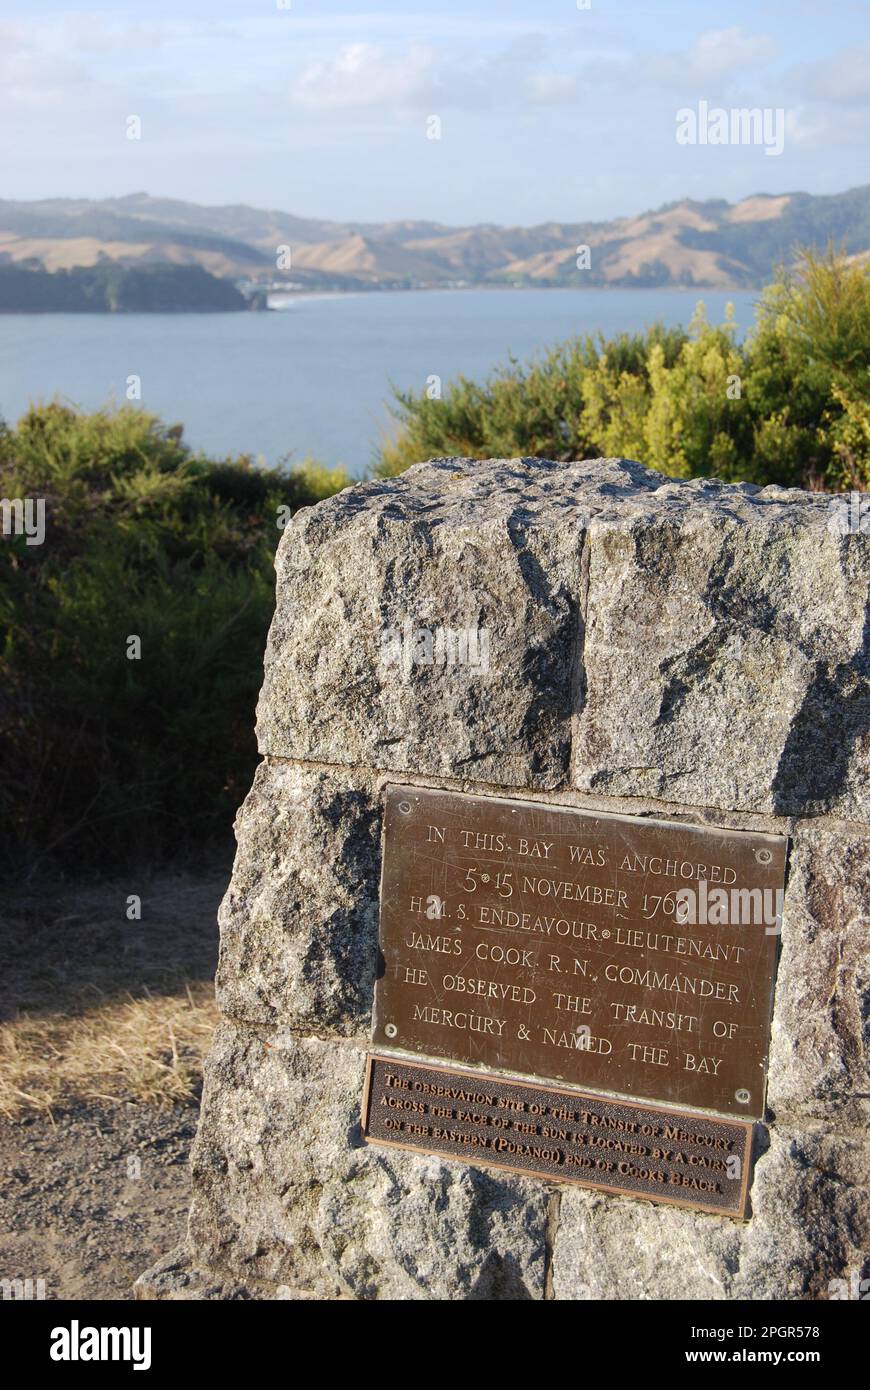 Plaque commemorating 1769 naming of Mercury Bay by Capt. James Cook, overlooking the bay in the Coromandel area of the North Island of New Zealand. Stock Photo